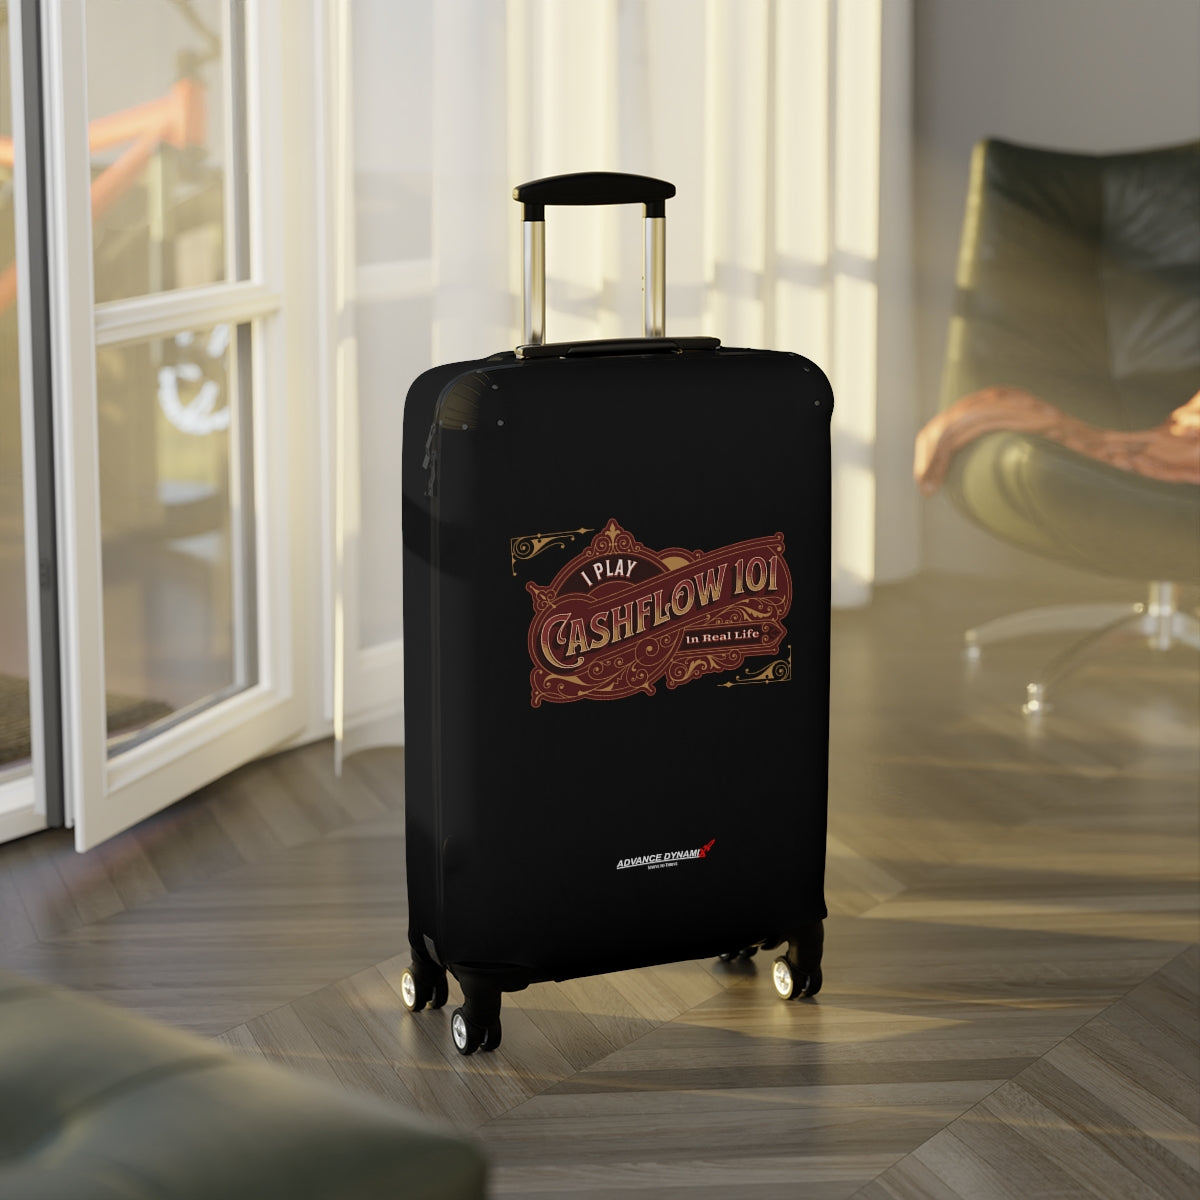 I play Cashflow 101 in real life - Luggage Covers Infused with Advance Dynamix Add-A-Tude - Tell the world!